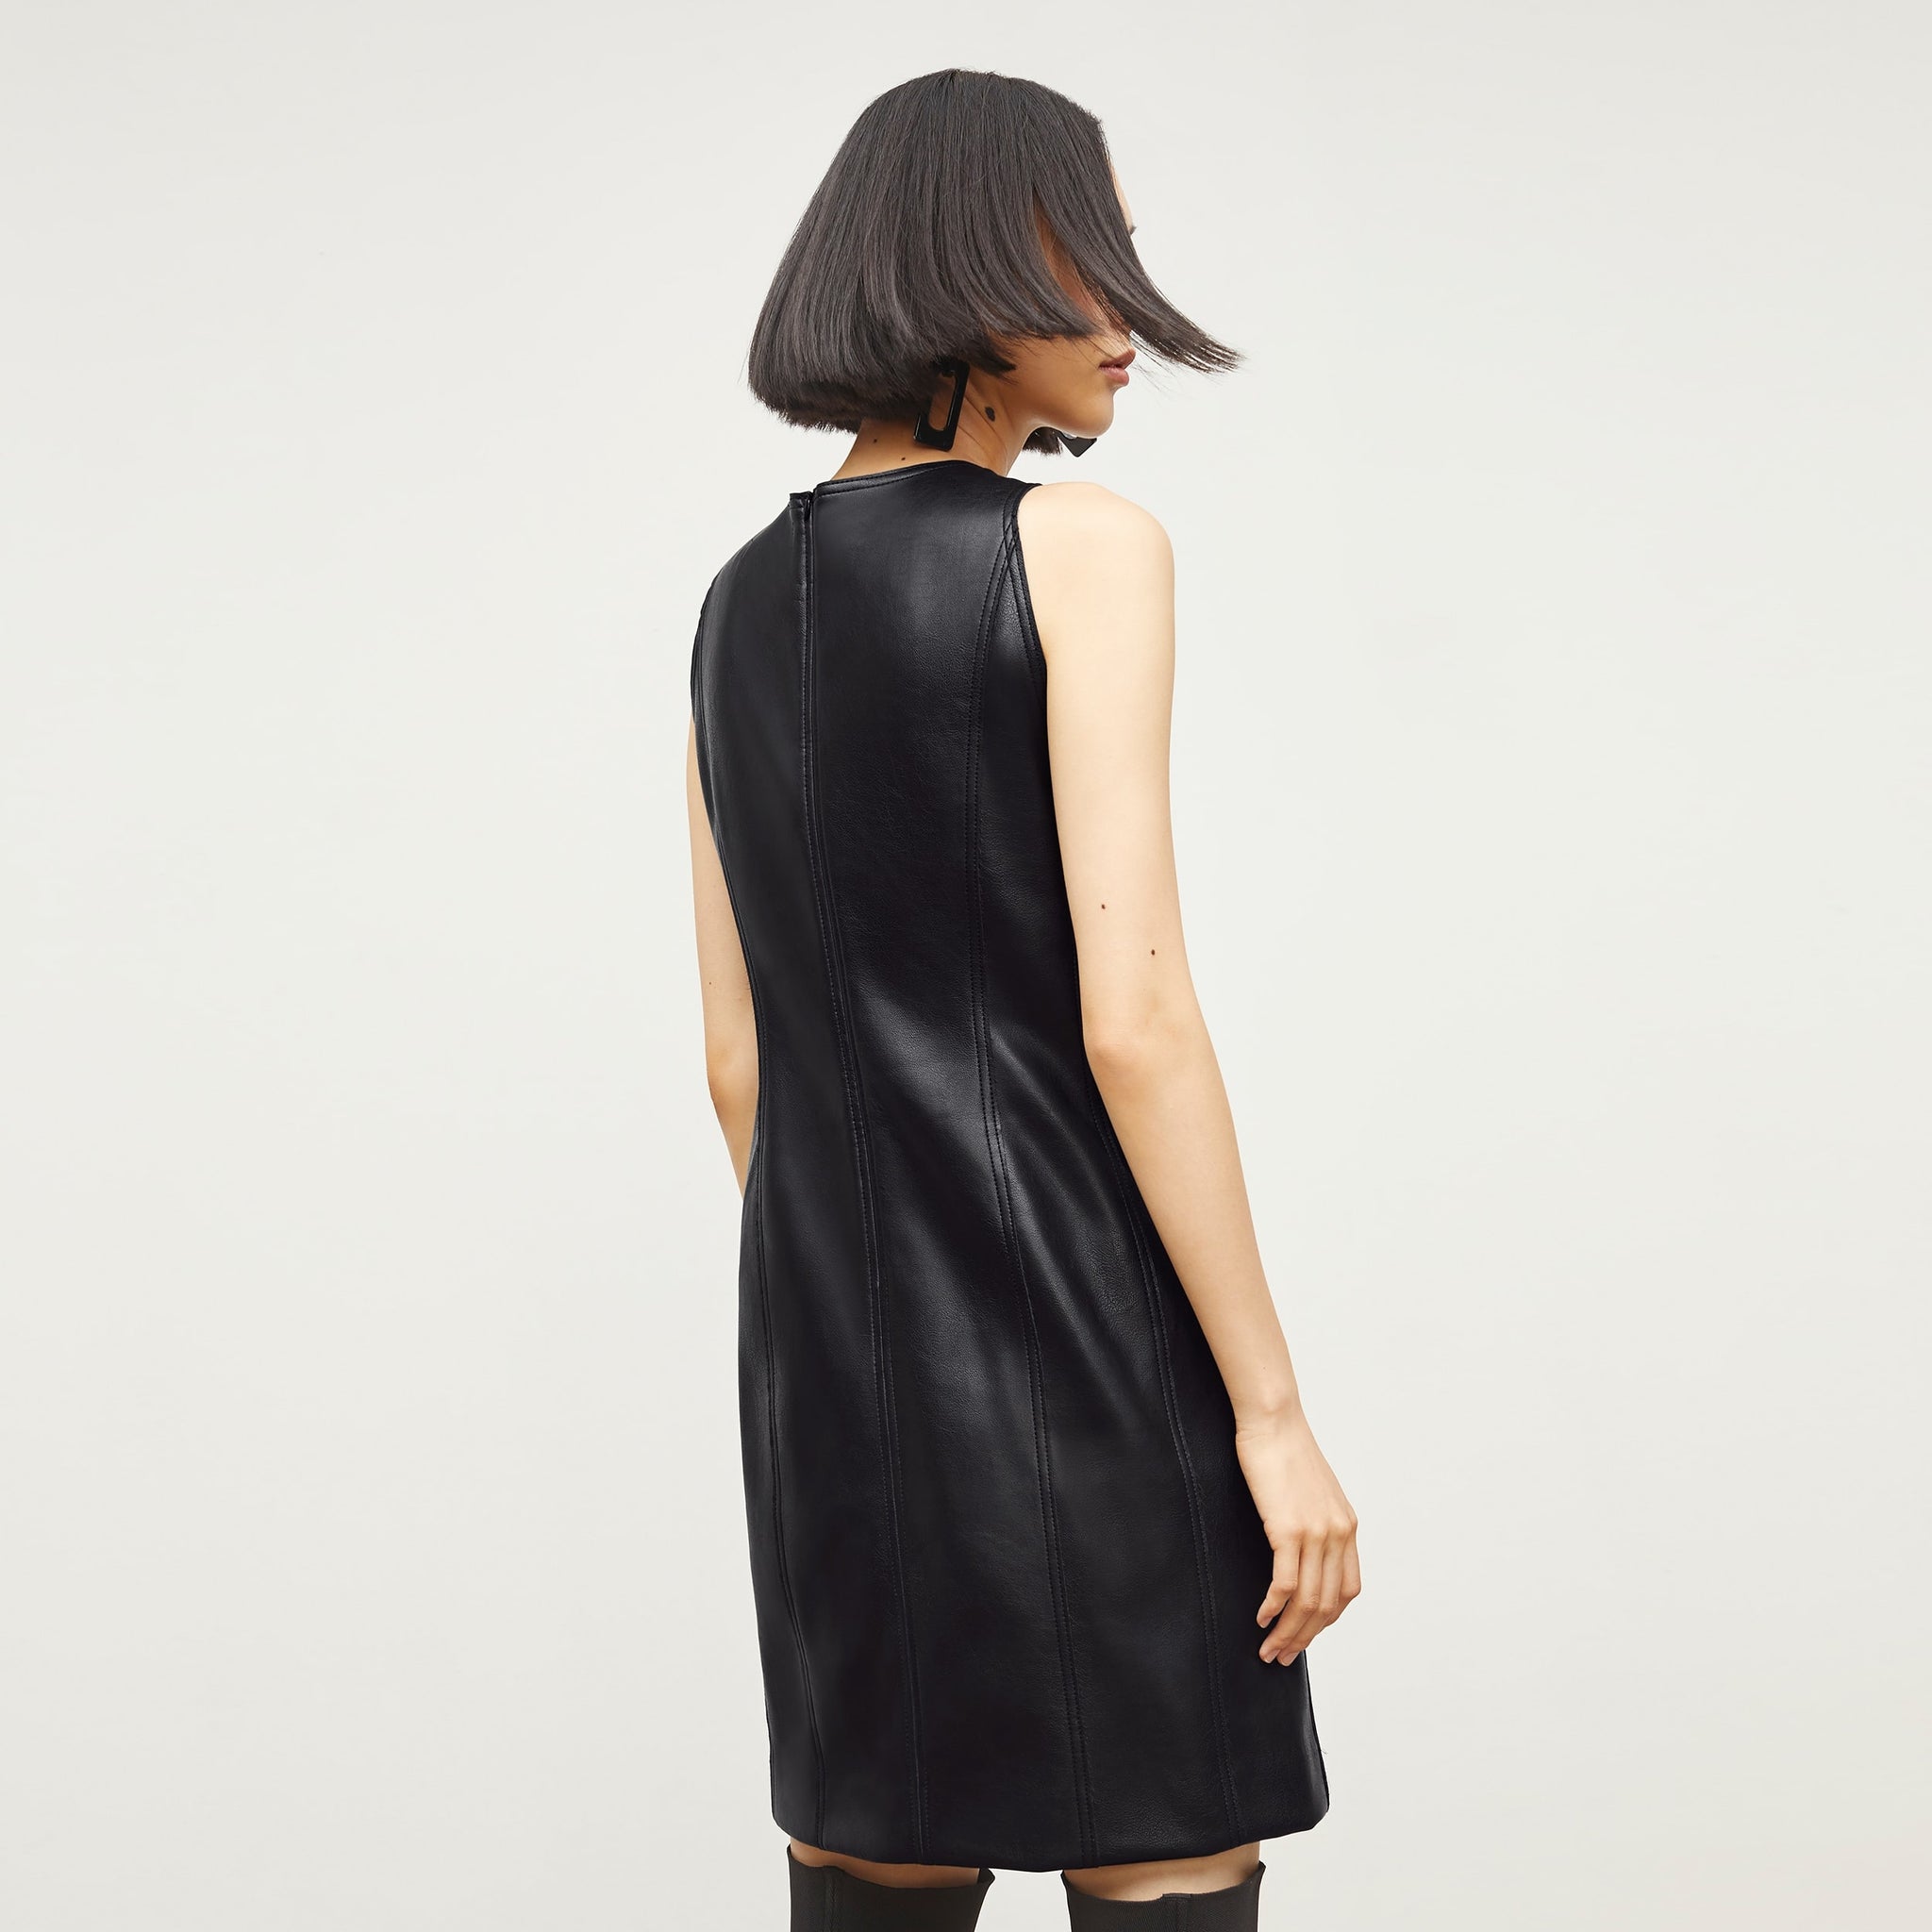 Back image of a woman standing wearing the Chloe Dress—Vegan Leather in Black